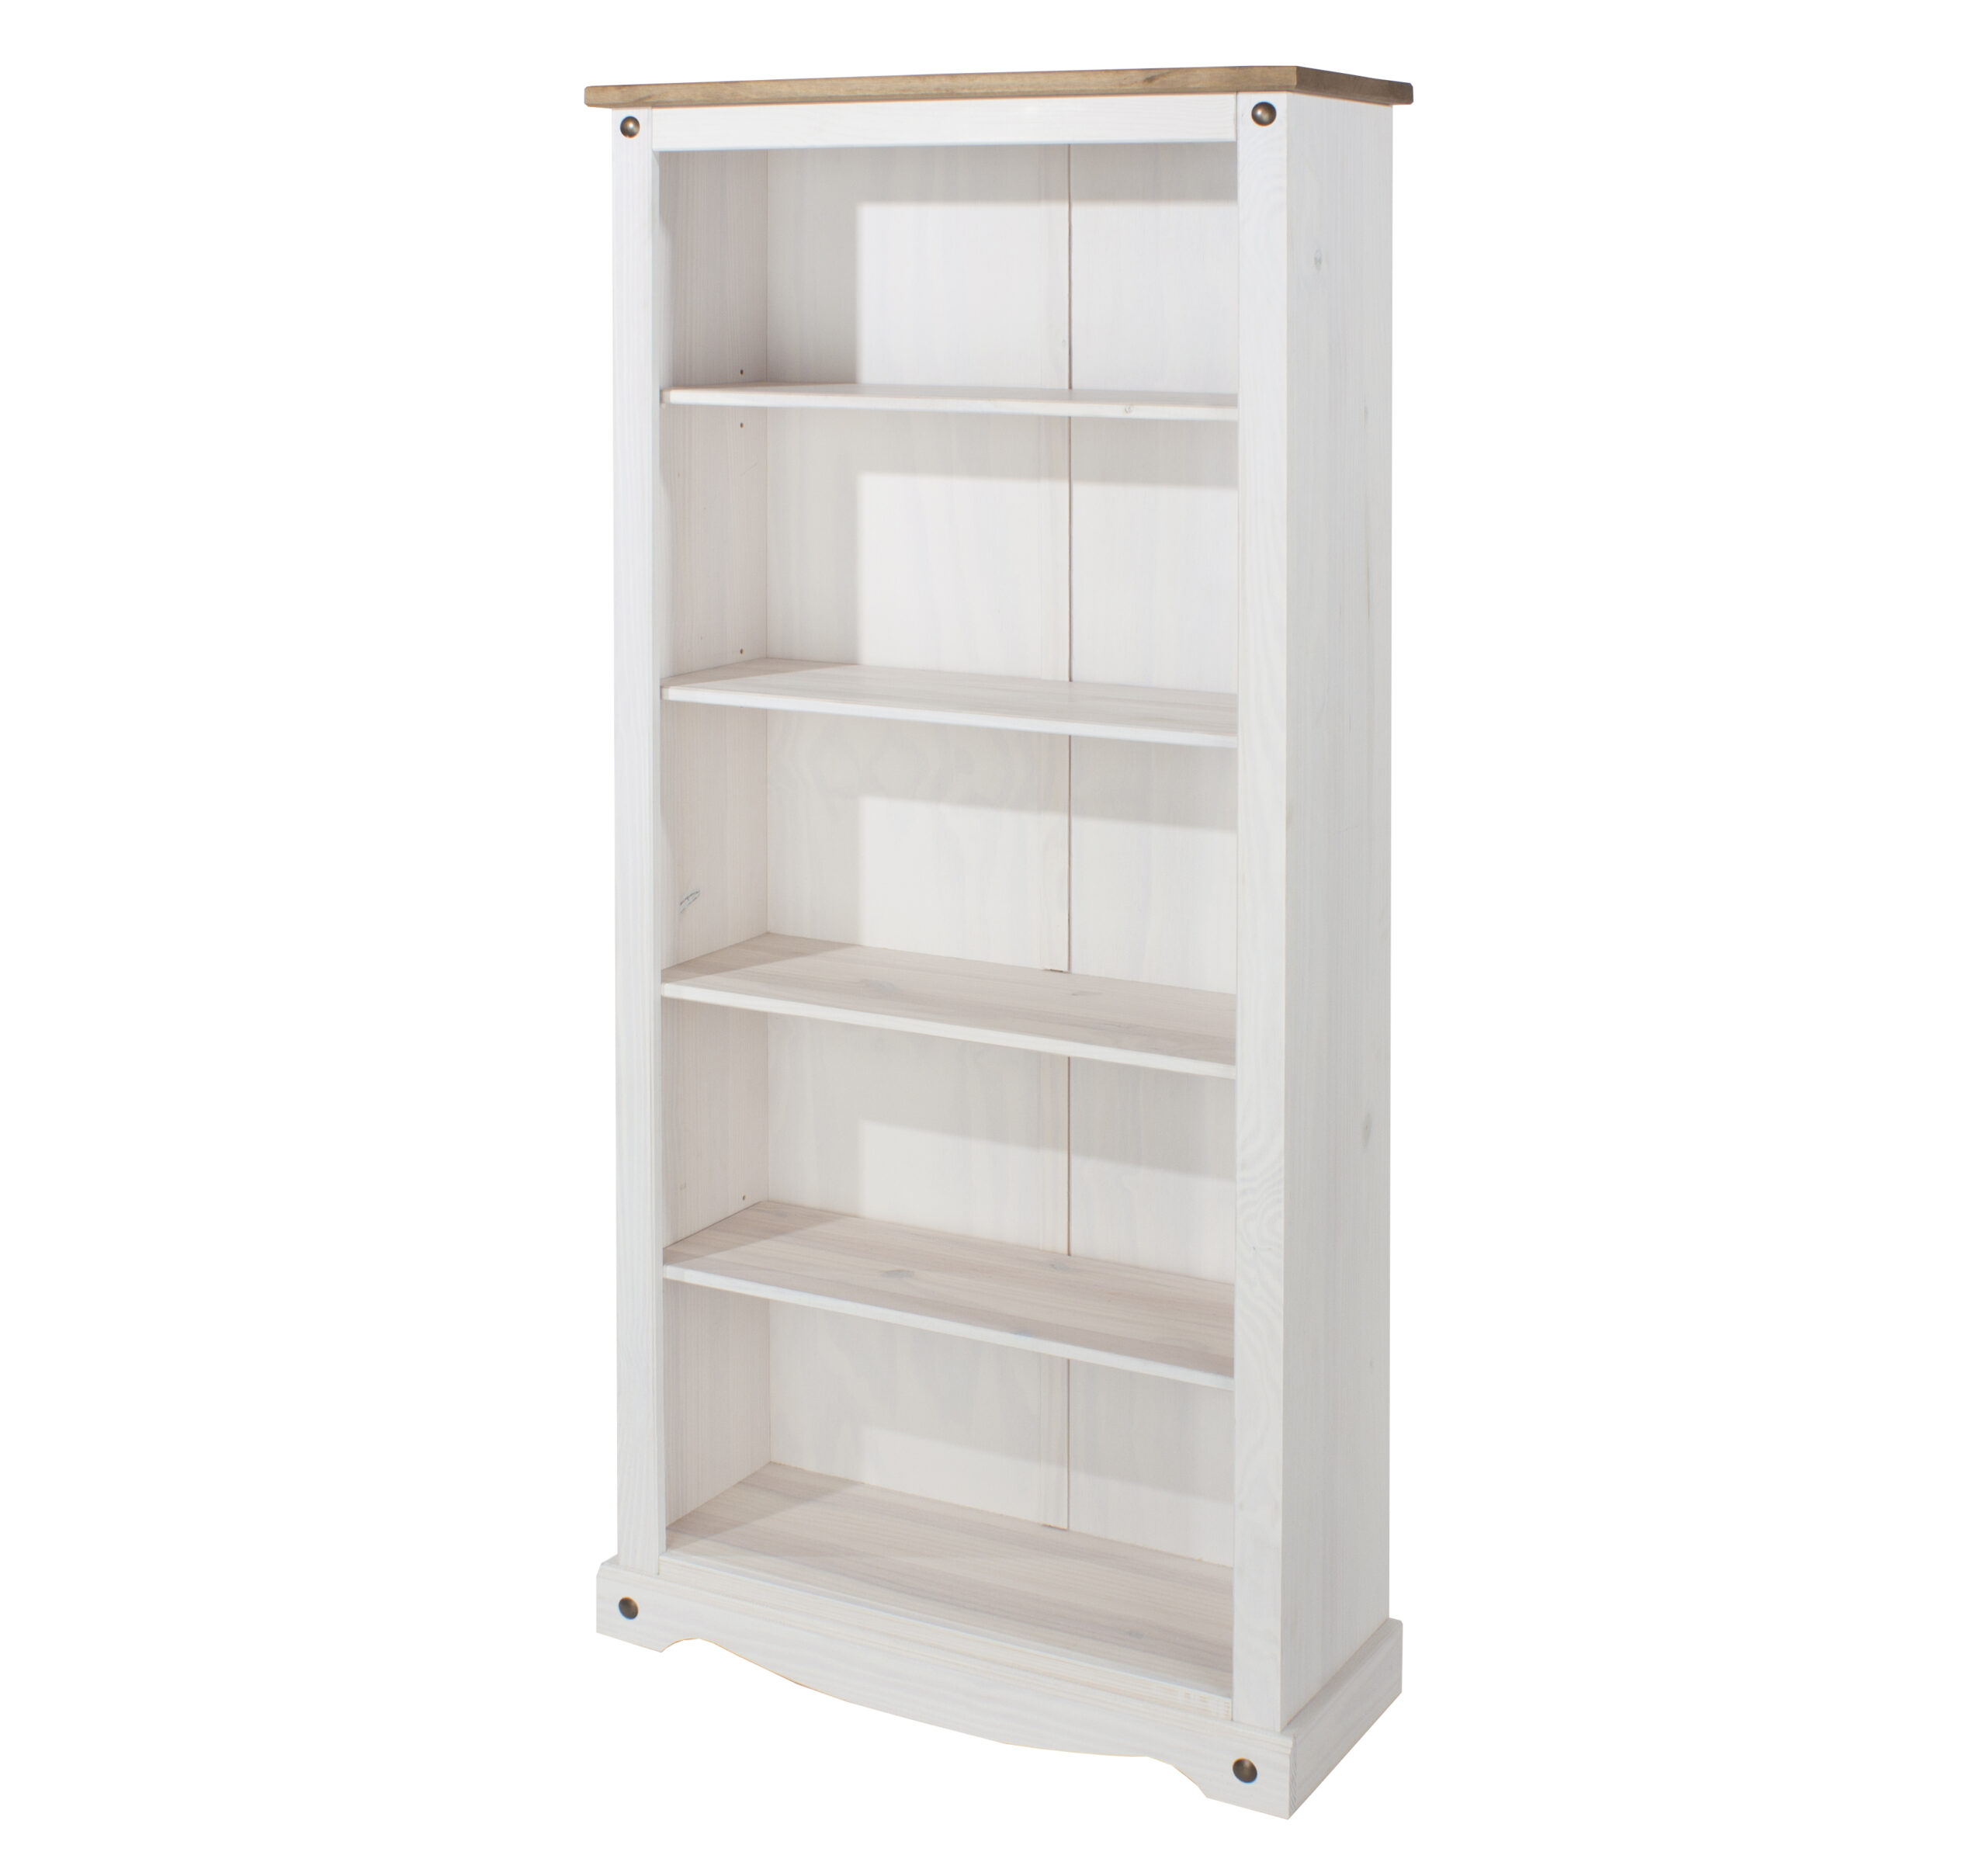 Carala Pine White Tall Bookcase White Painted Adjustable Shelves